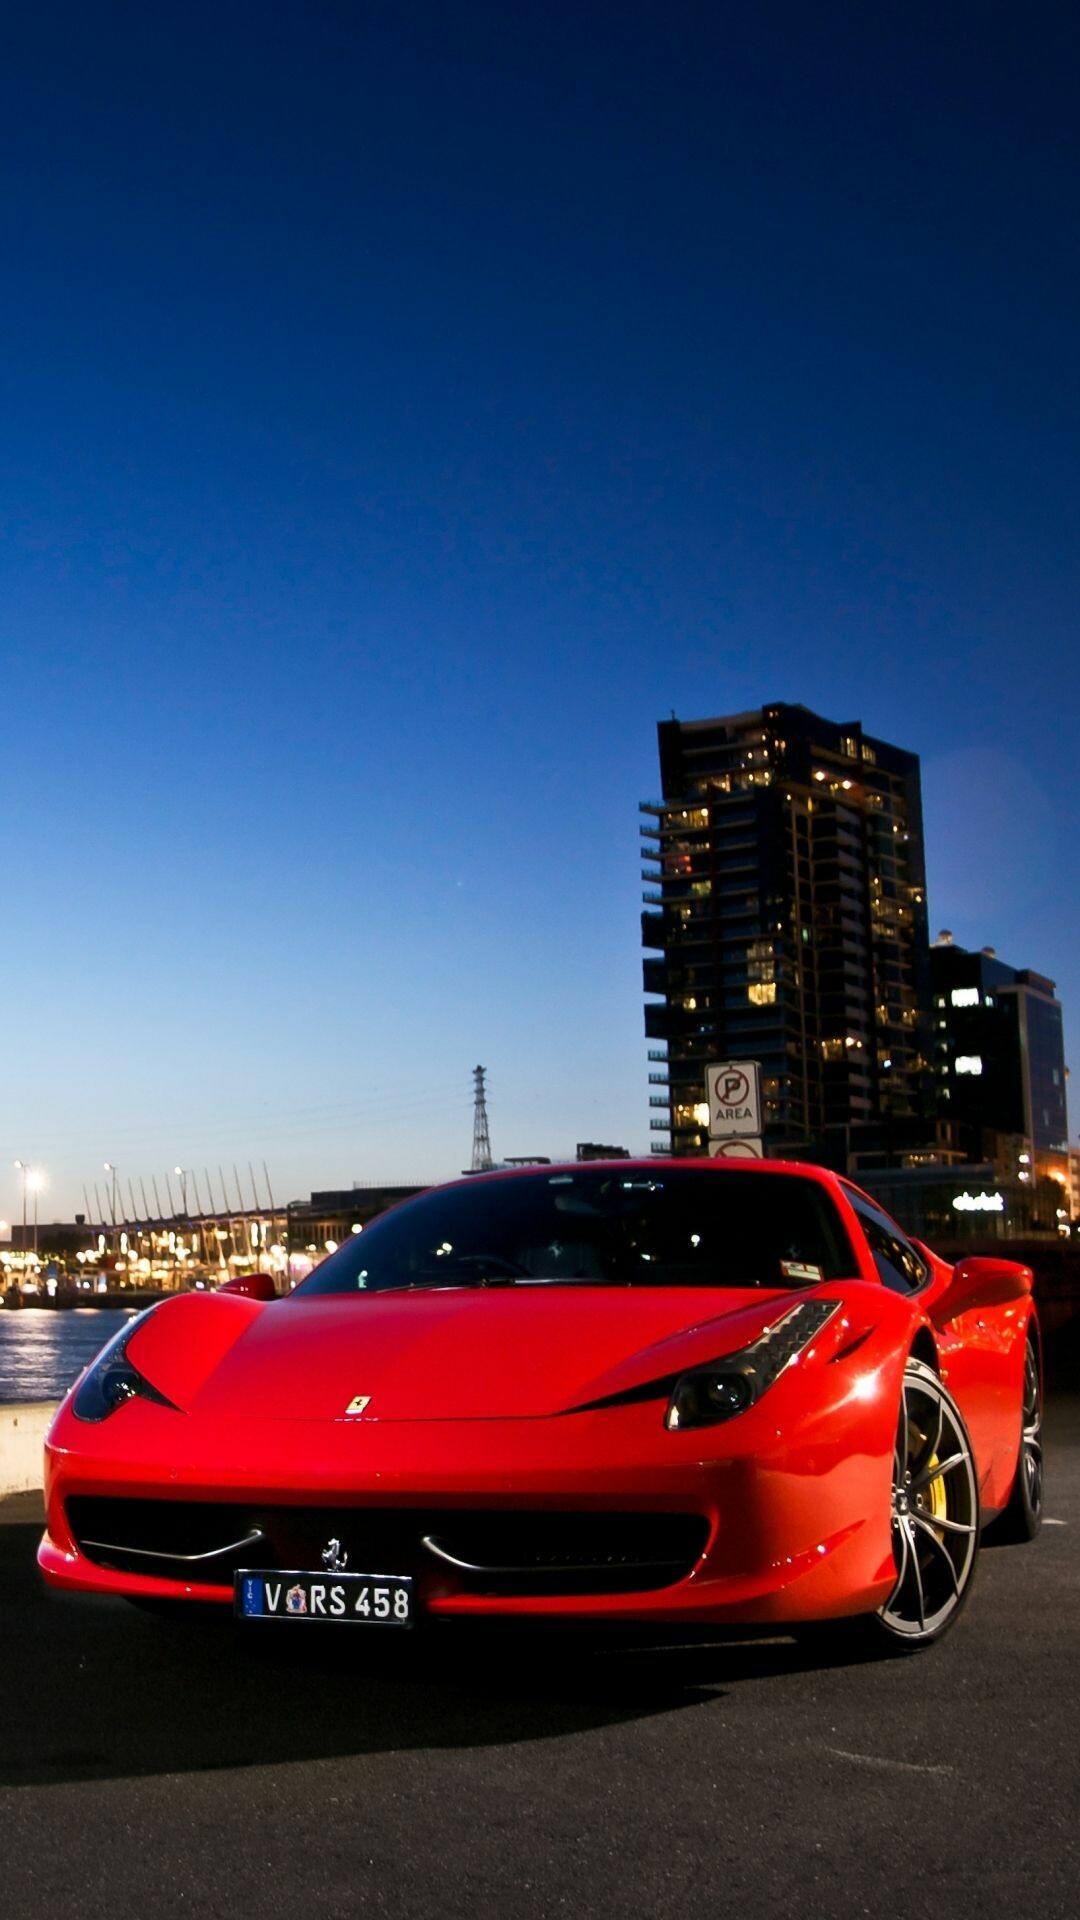 77+ Ferrari Wallpapers: HD, 4K, 5K for PC and Mobile | Download free images  for iPhone, Android